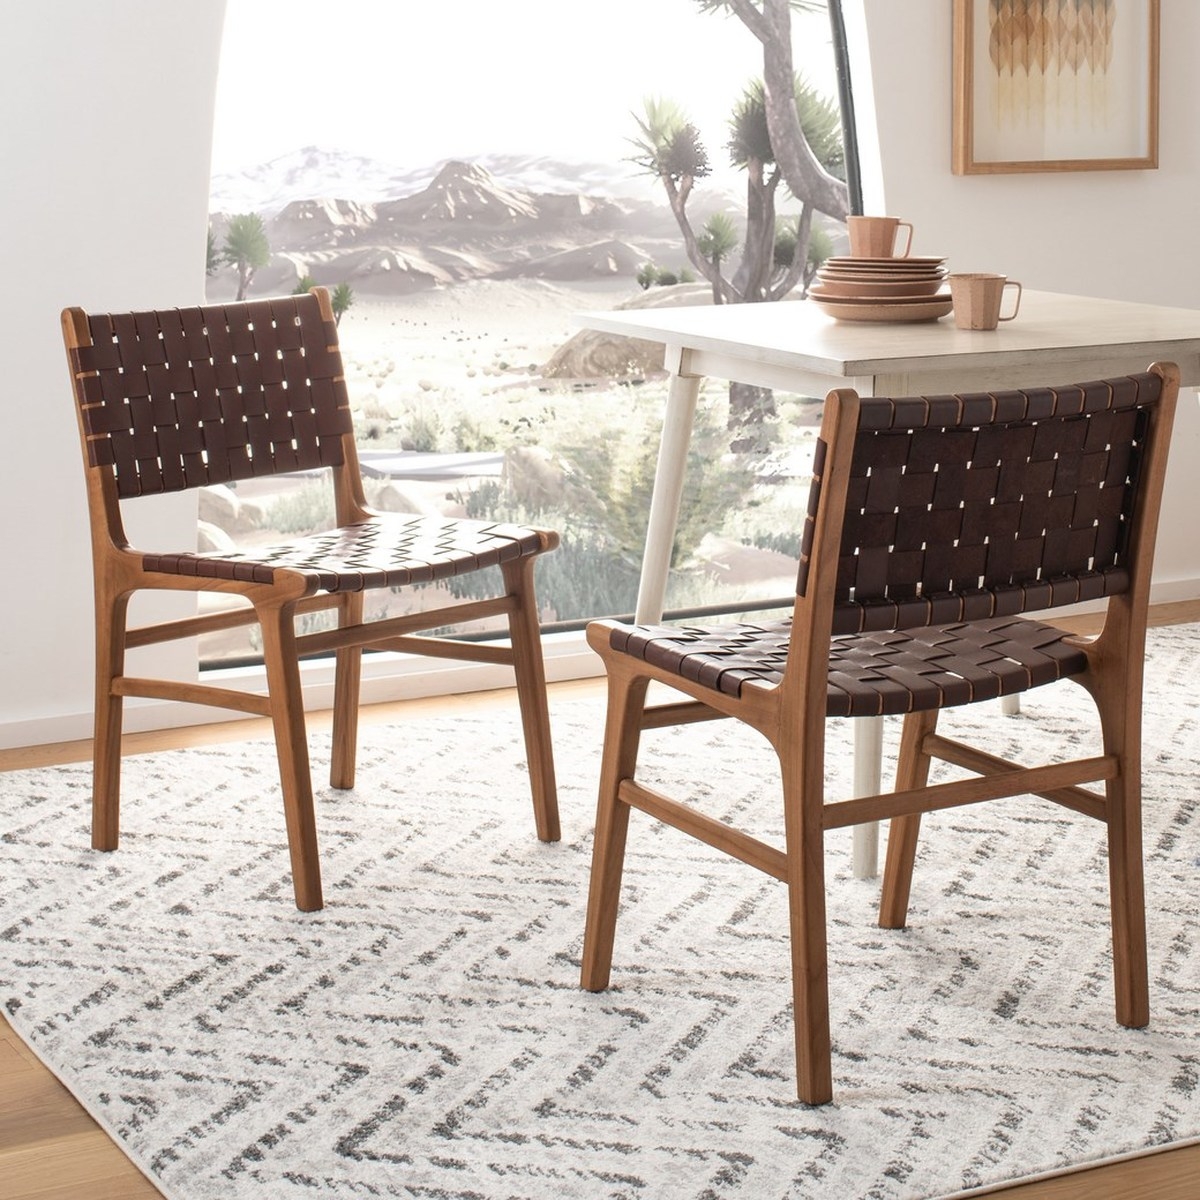 Taika Woven Leather Dining Chair (Set of 2) - Cognac/Natural - Arlo Home - Image 1